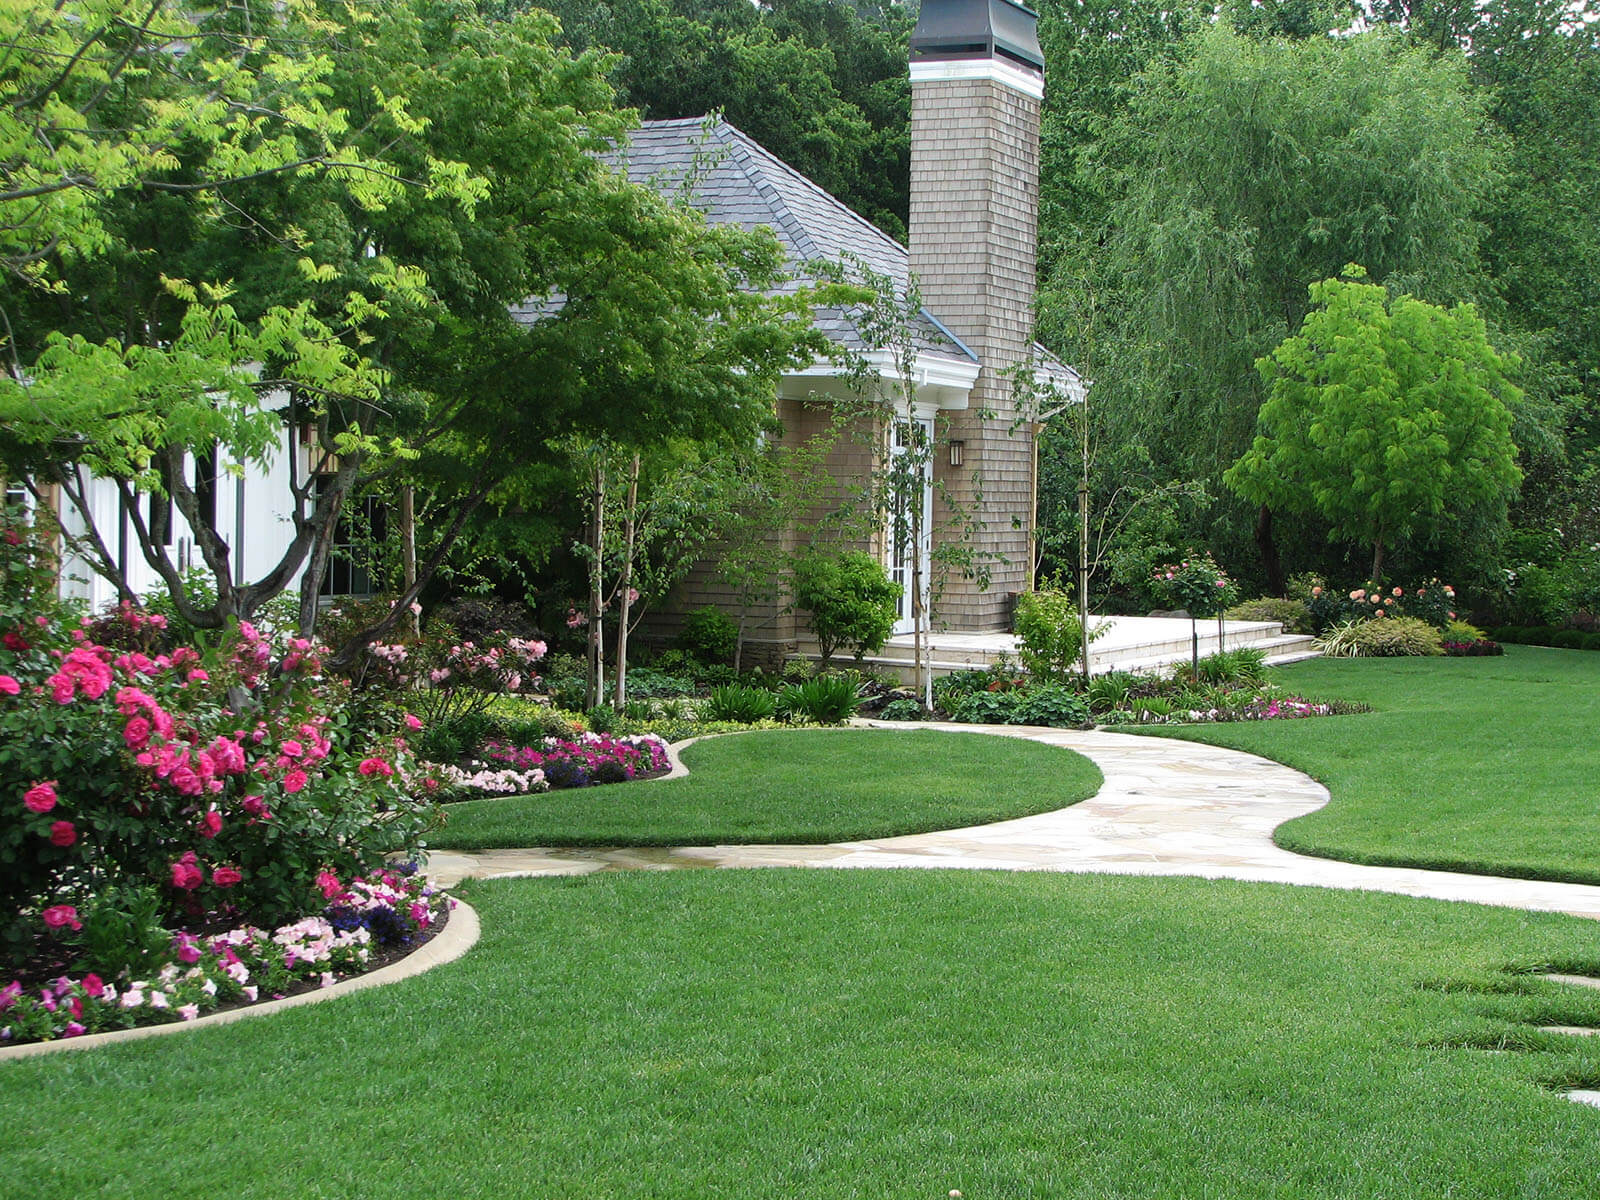 Curvy white stone pathways carving through manicured short lawn, going to various entrances around the house, like a staged white stone deck with stairs